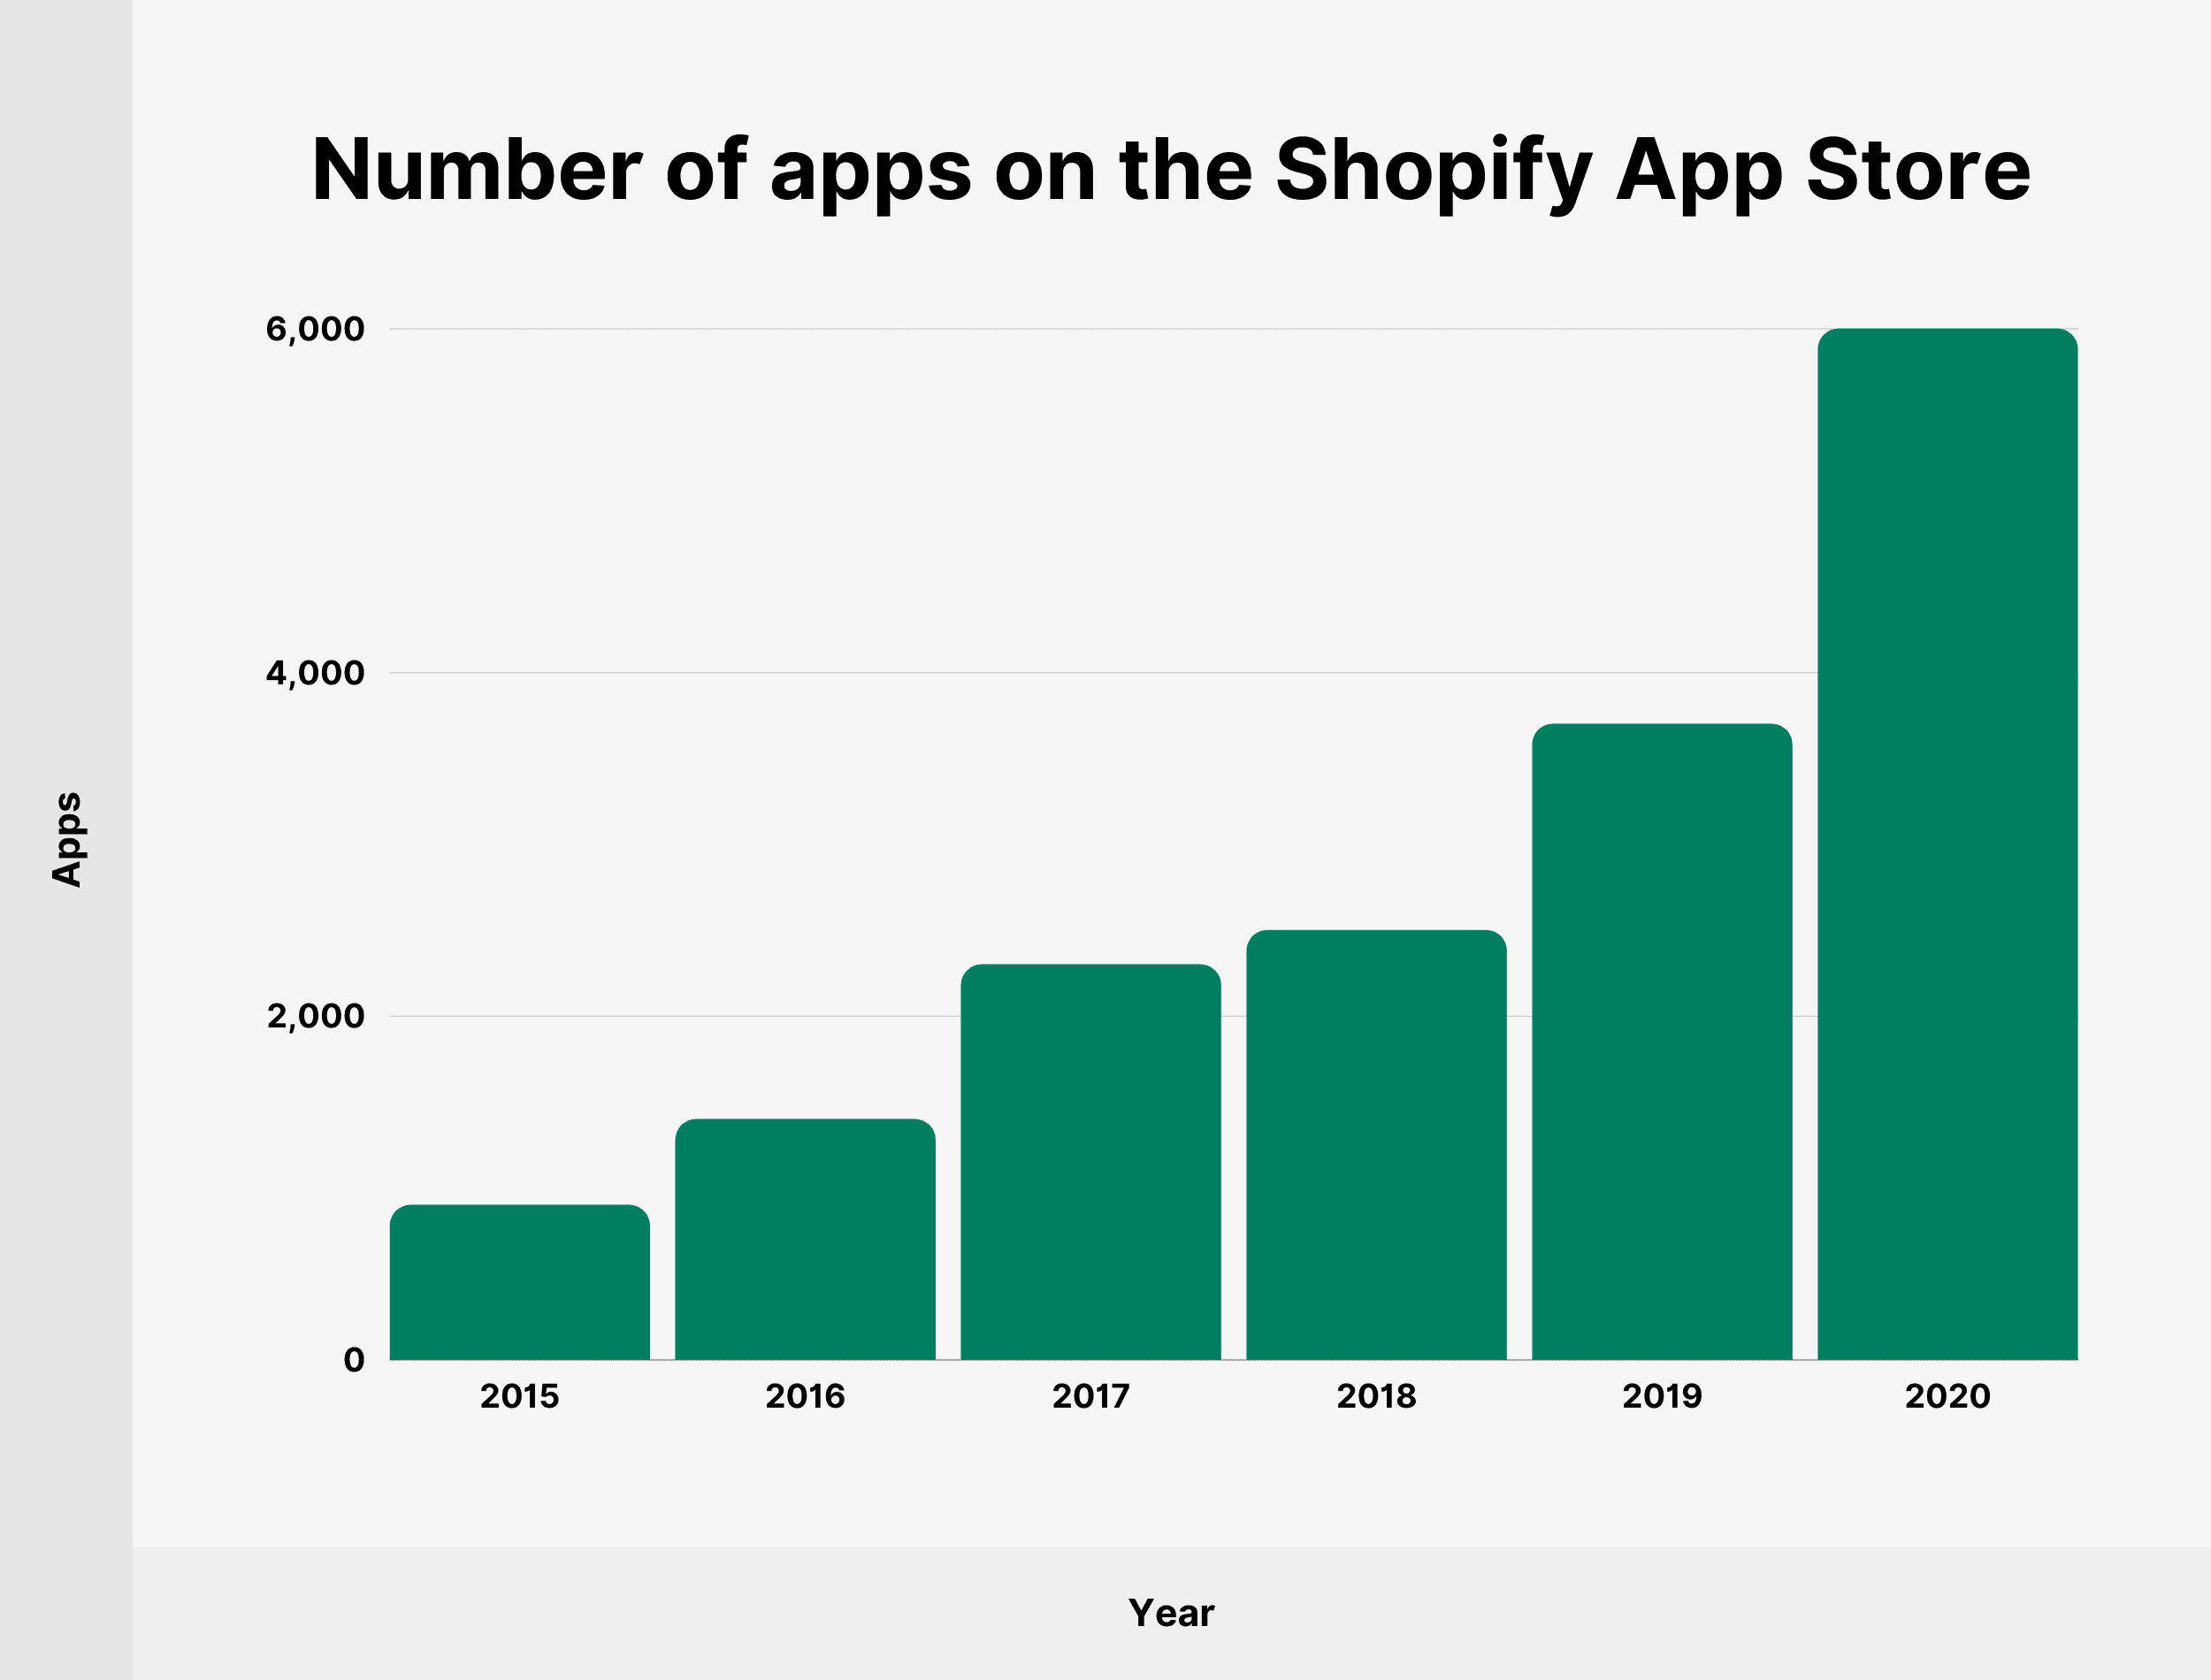 Number of apps on the Shopify App Store